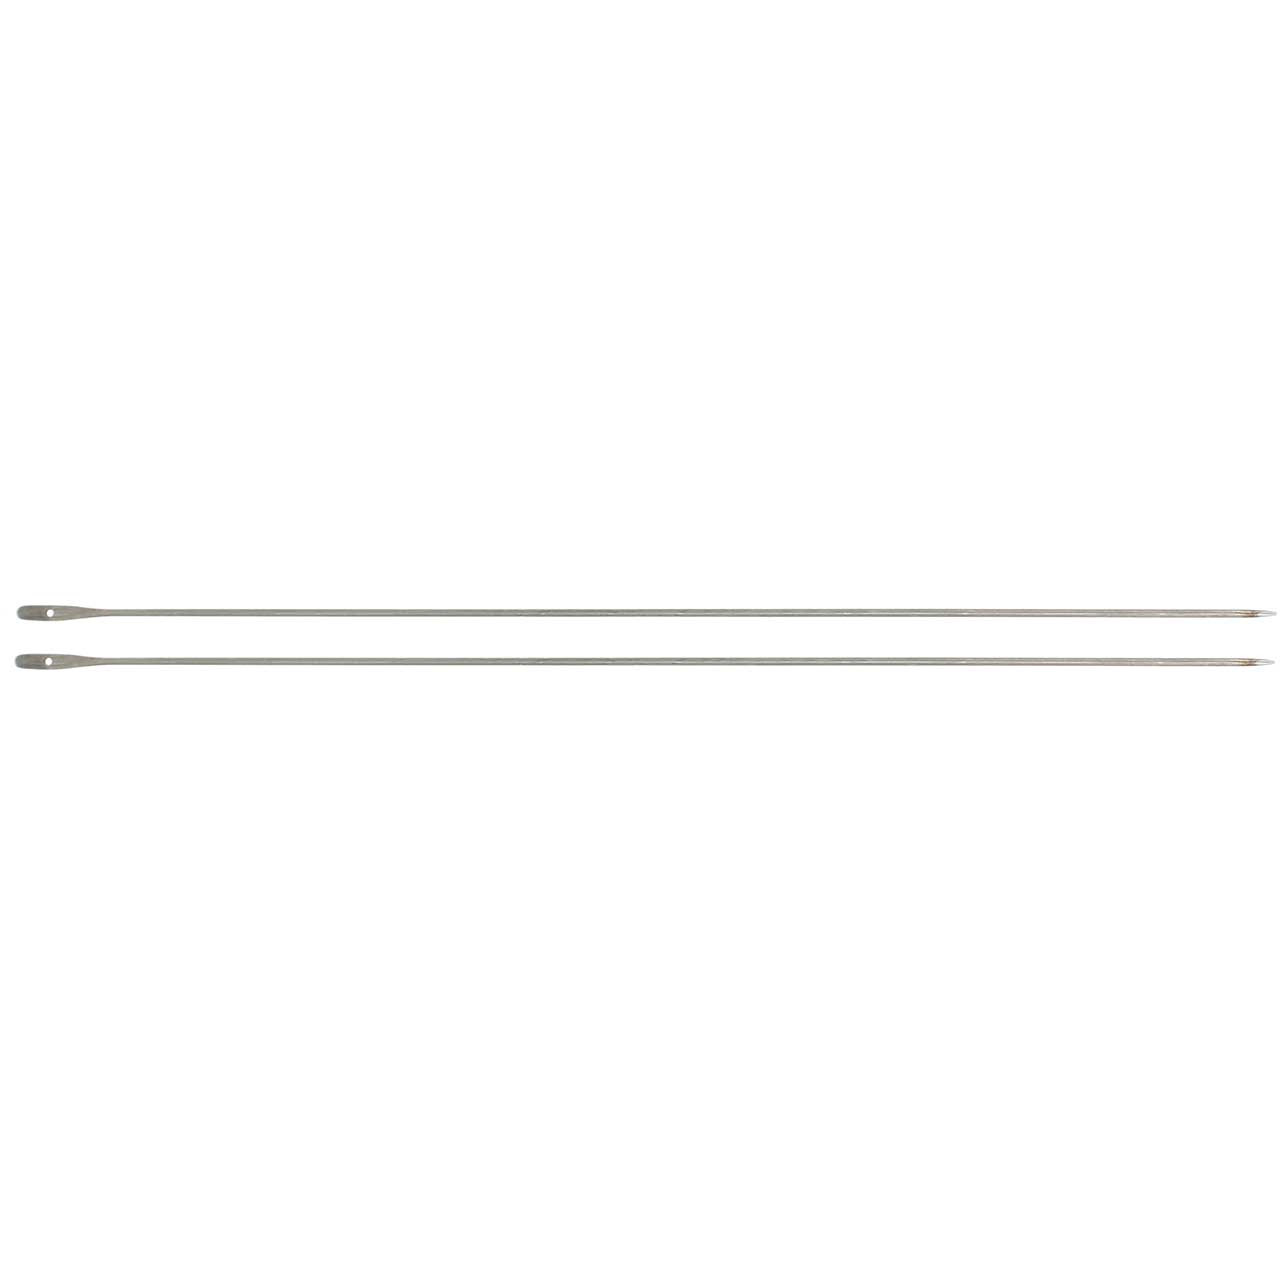 Bent Needle for Bead Spinner (pack/2)